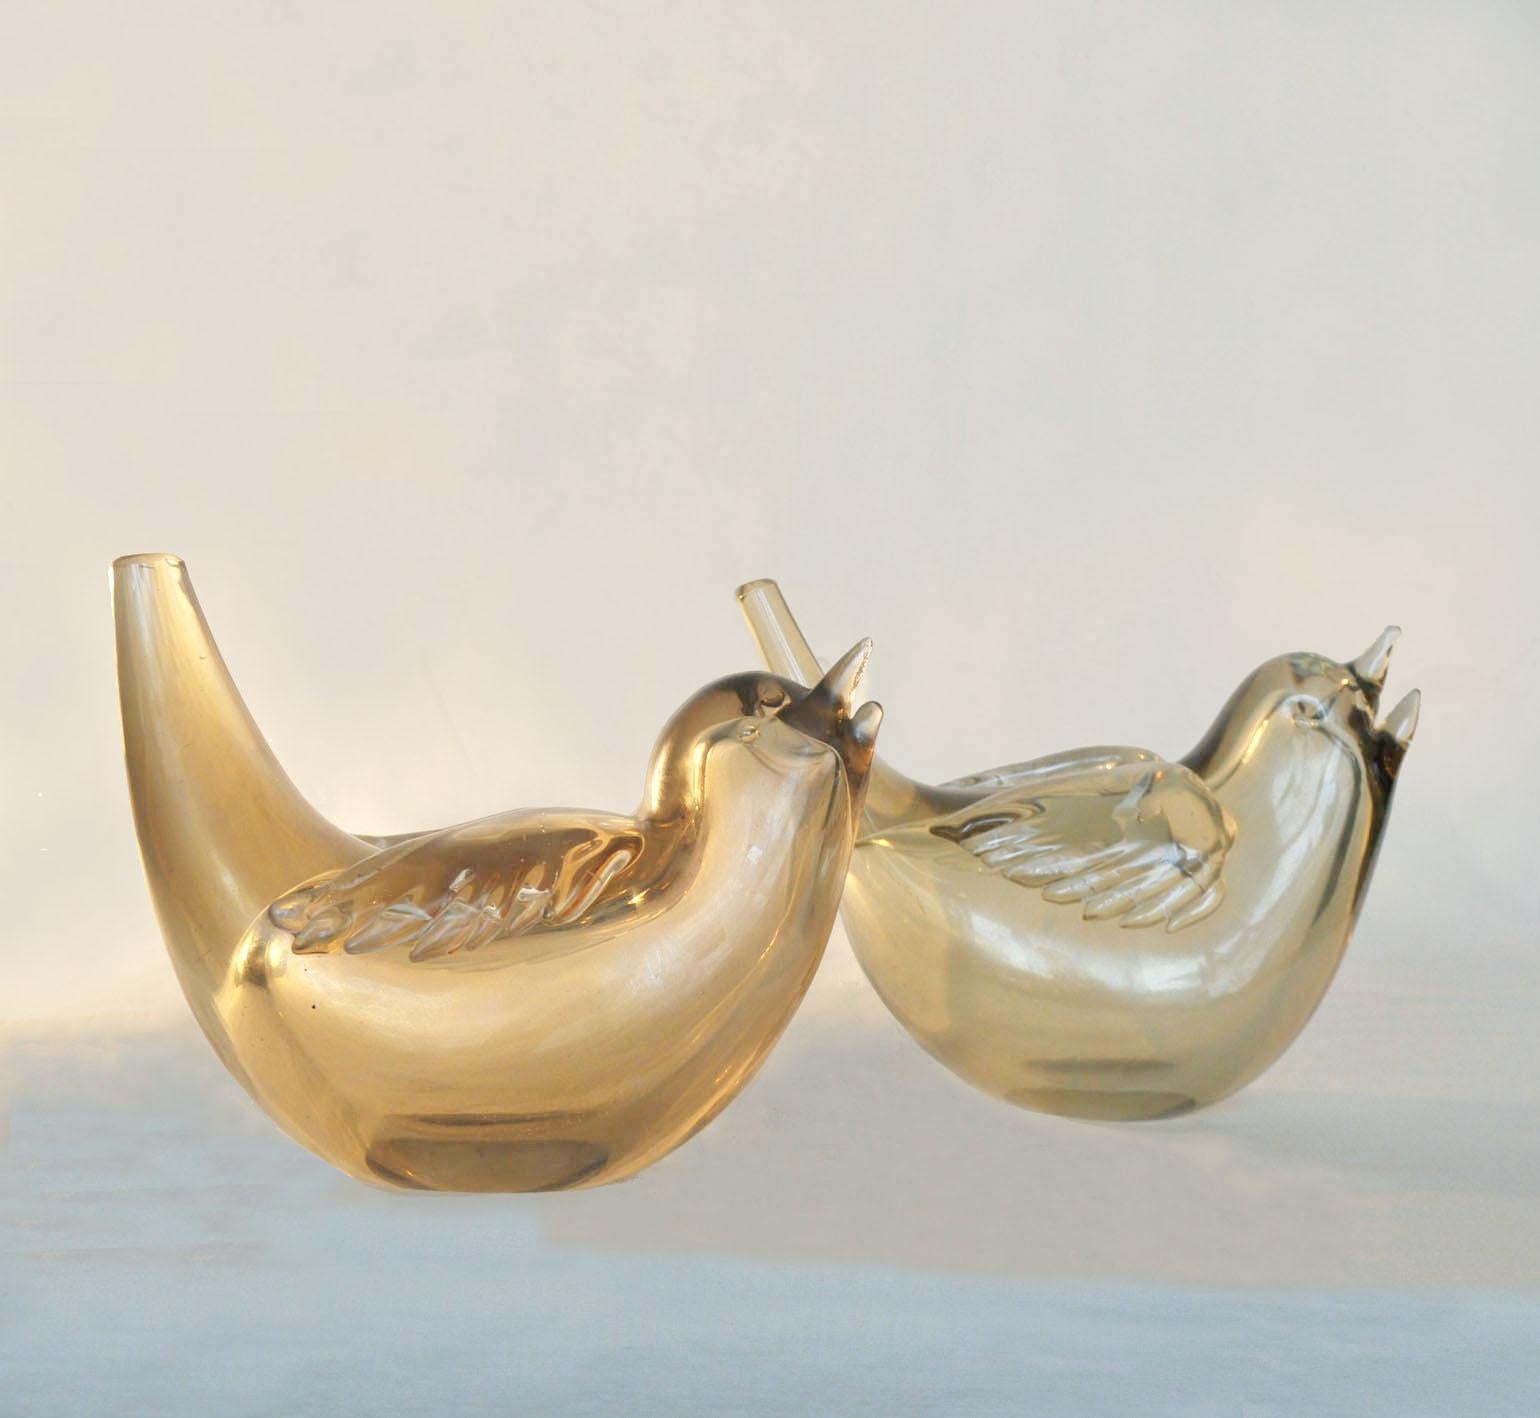 Hand-Crafted Pair of Birds Sculpture Hand Blown Glass by Tyra Lundgren for Paolo Venini  1940